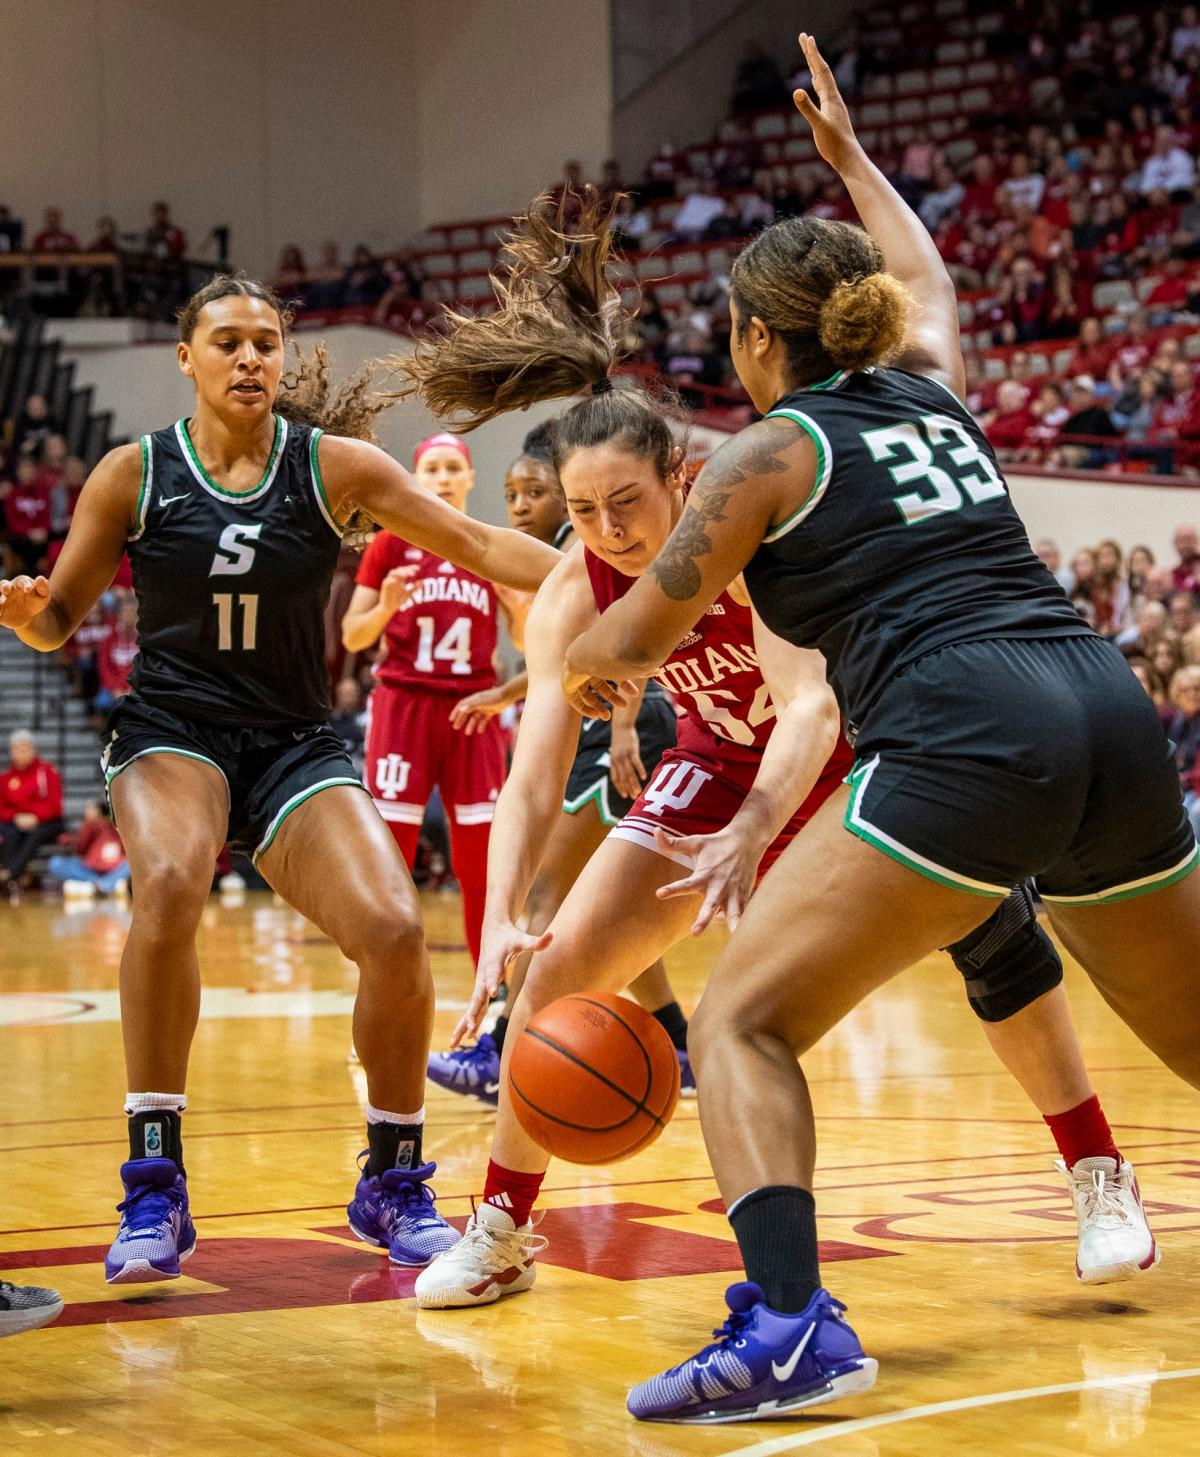 Indiana women's basketball gets strong defensive effort in win over Stetson